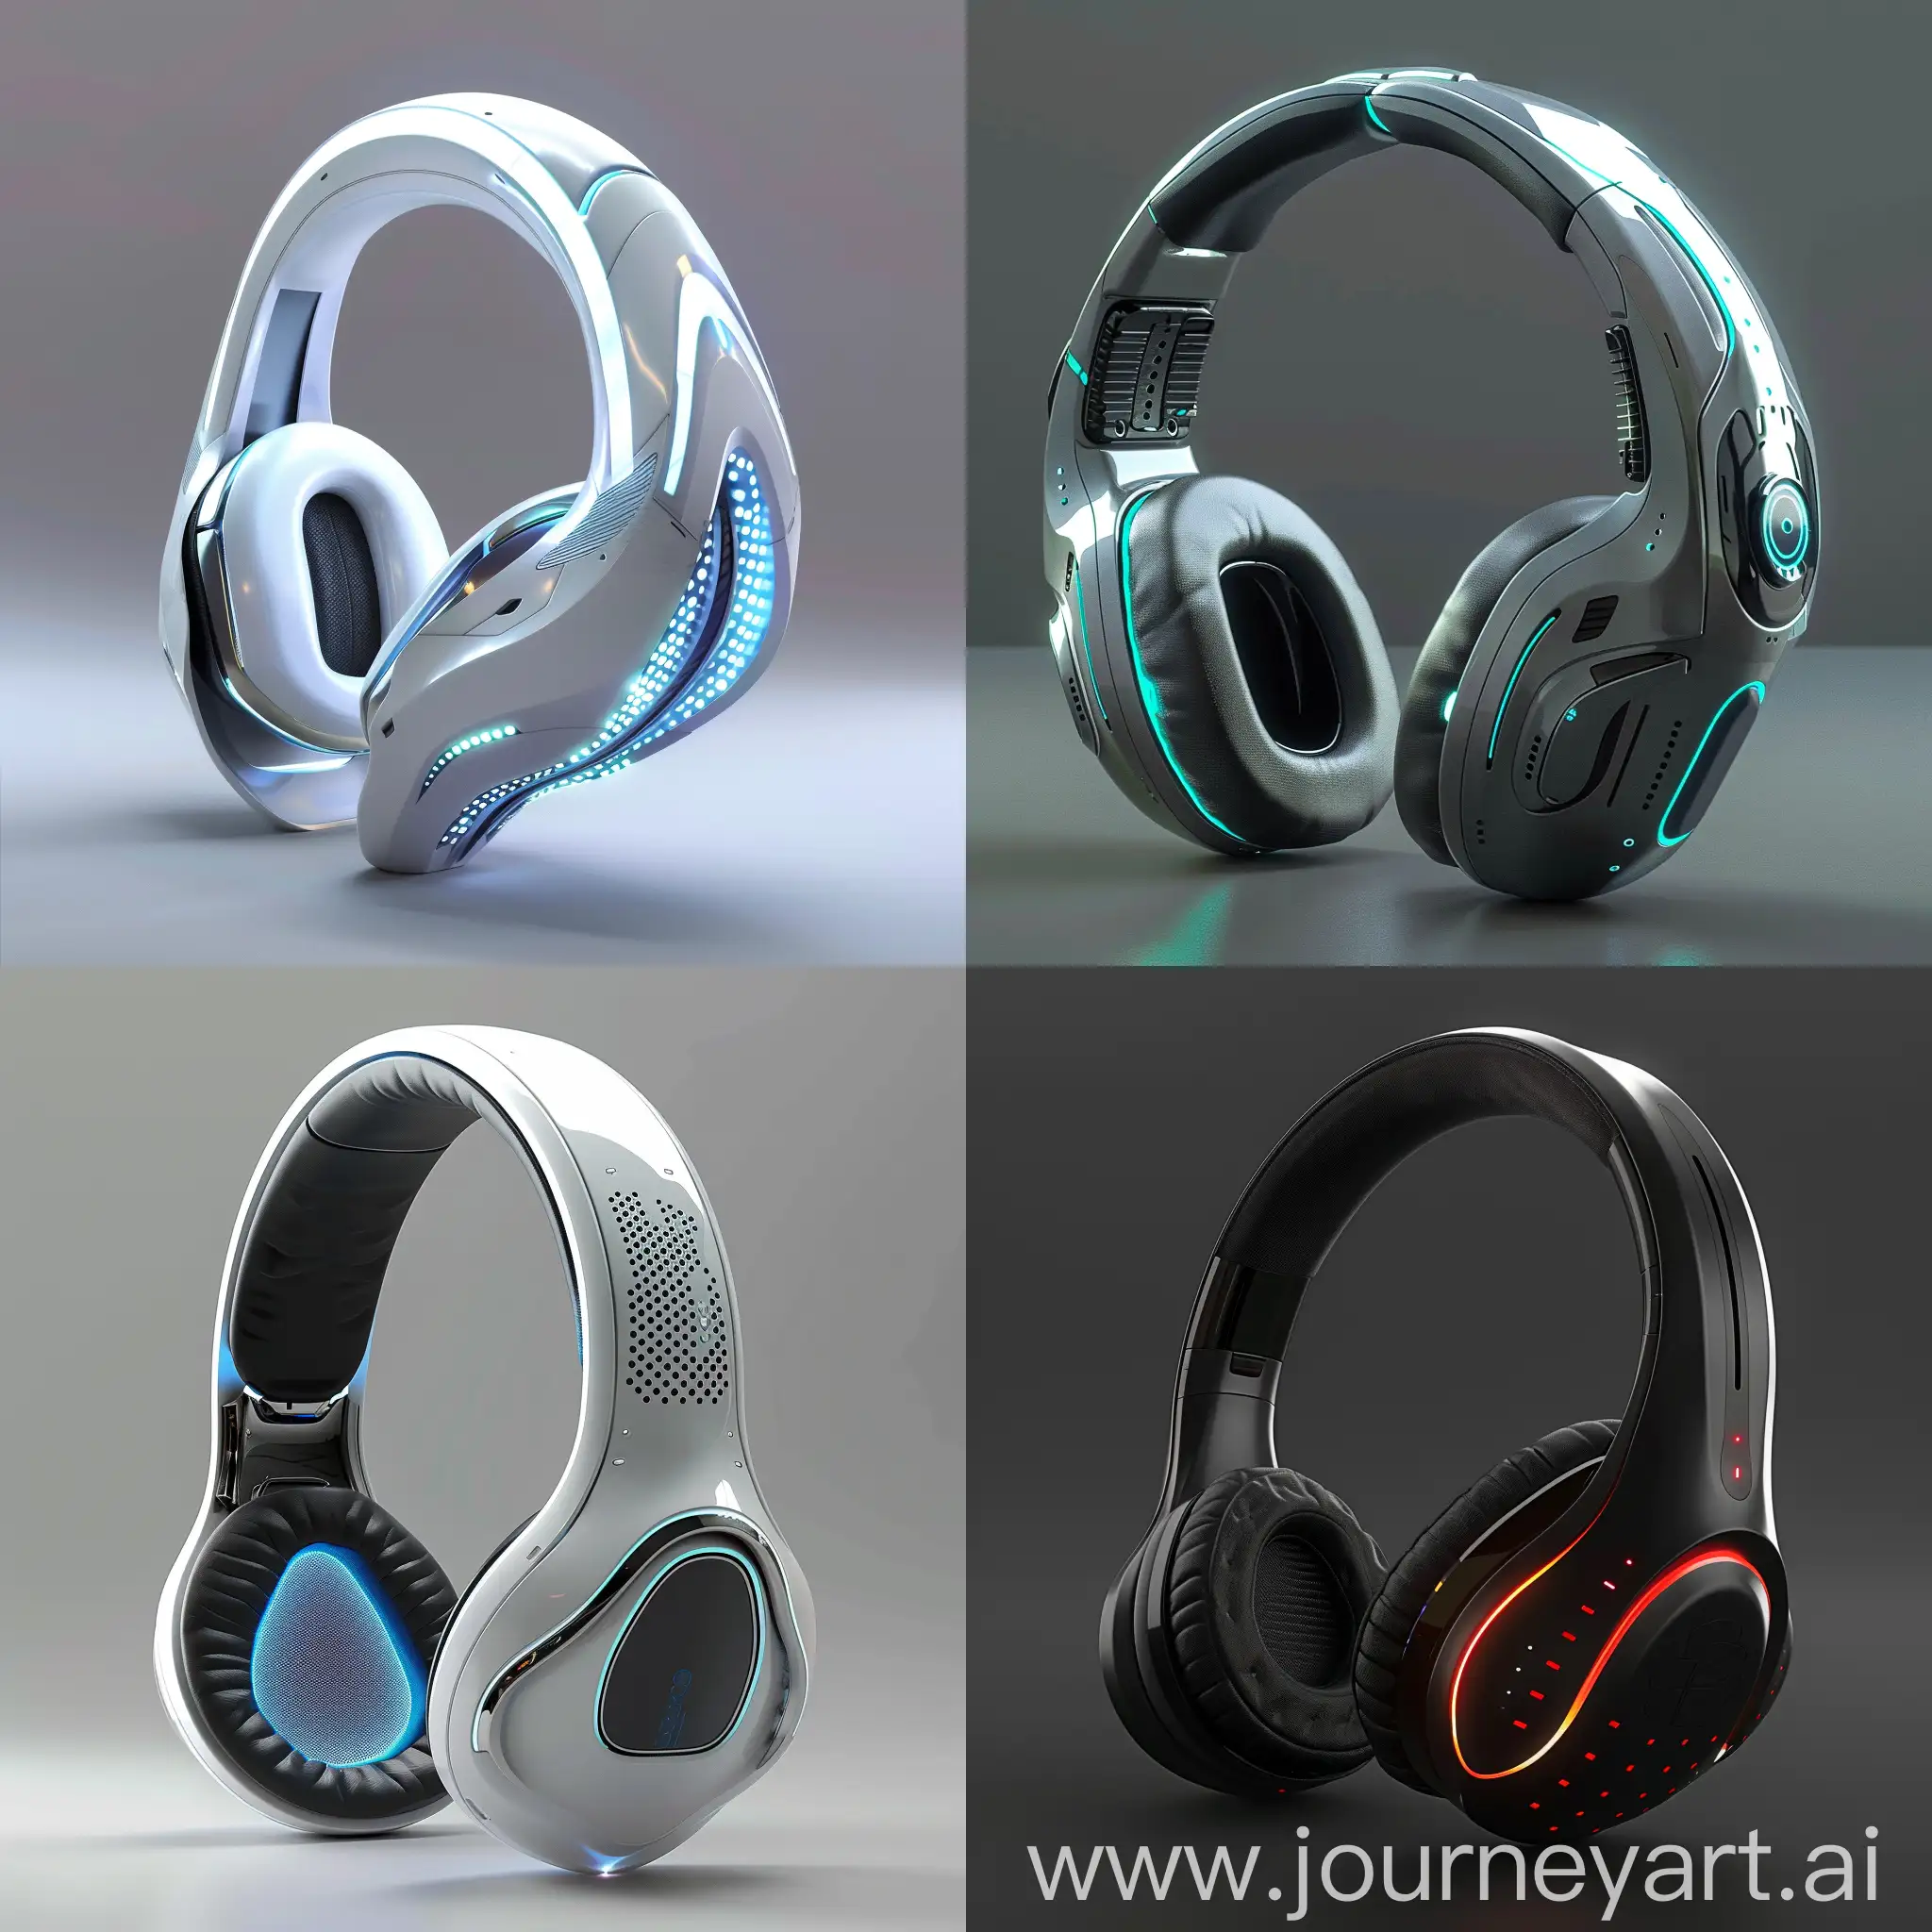 SciFi-PC-Headphones-with-Advanced-Sound-Customization-and-Holographic-Displays